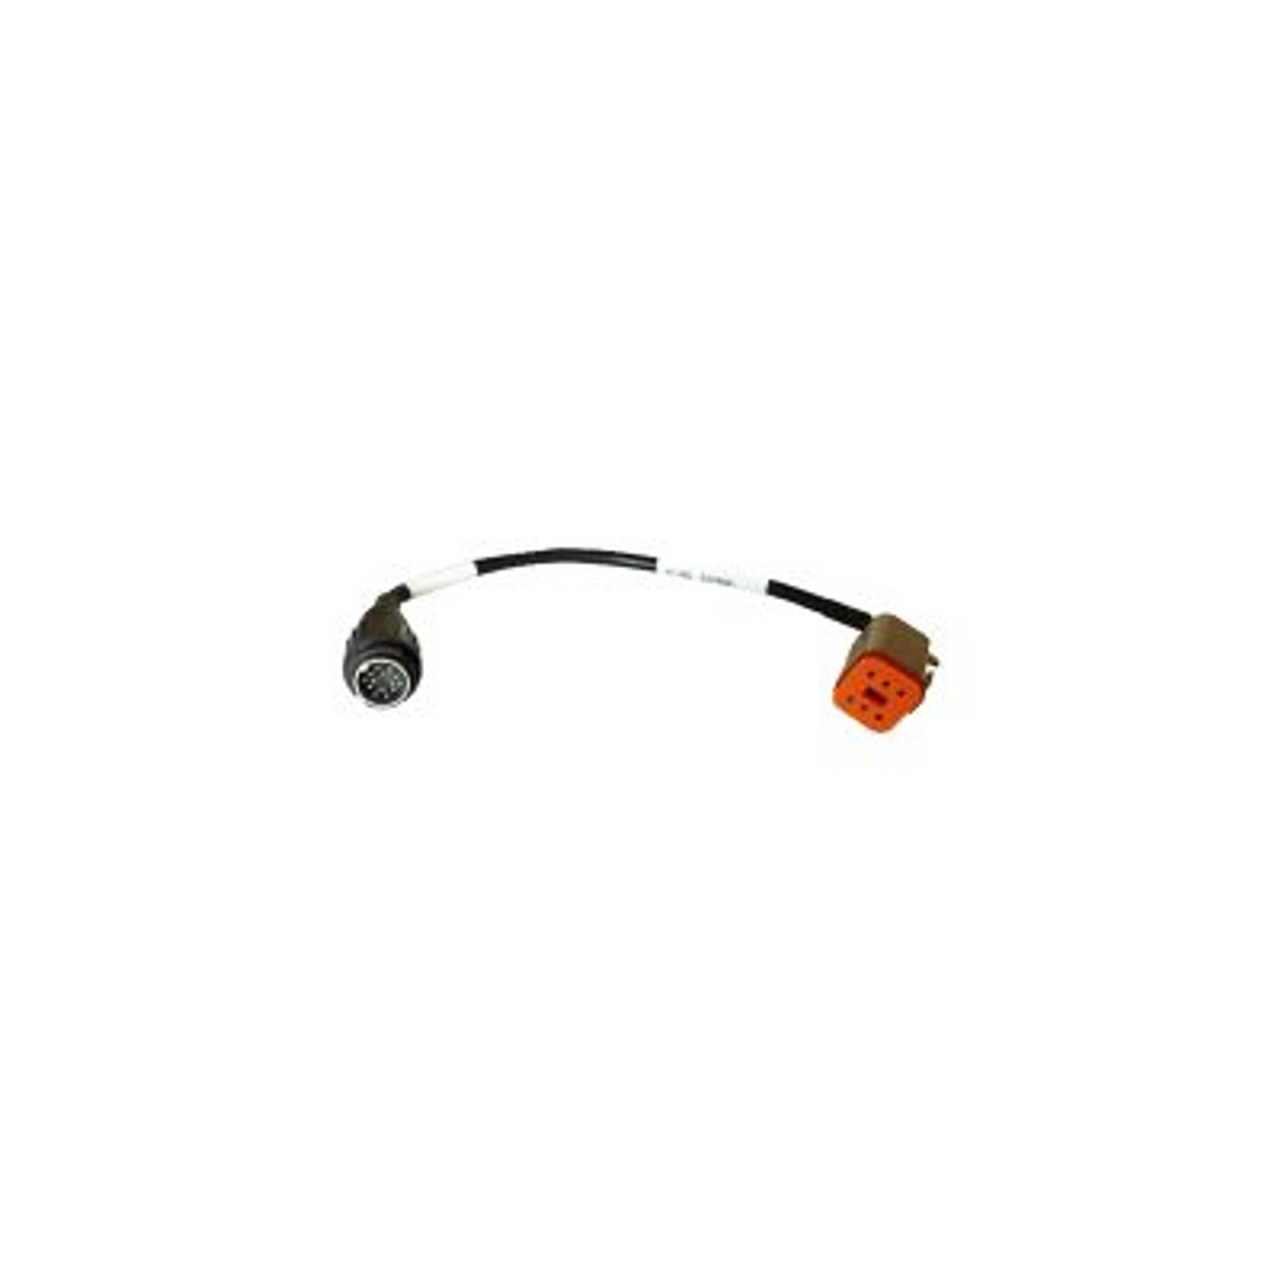 Motorscan Harley 6-Pin CAN Diagnostic Cable